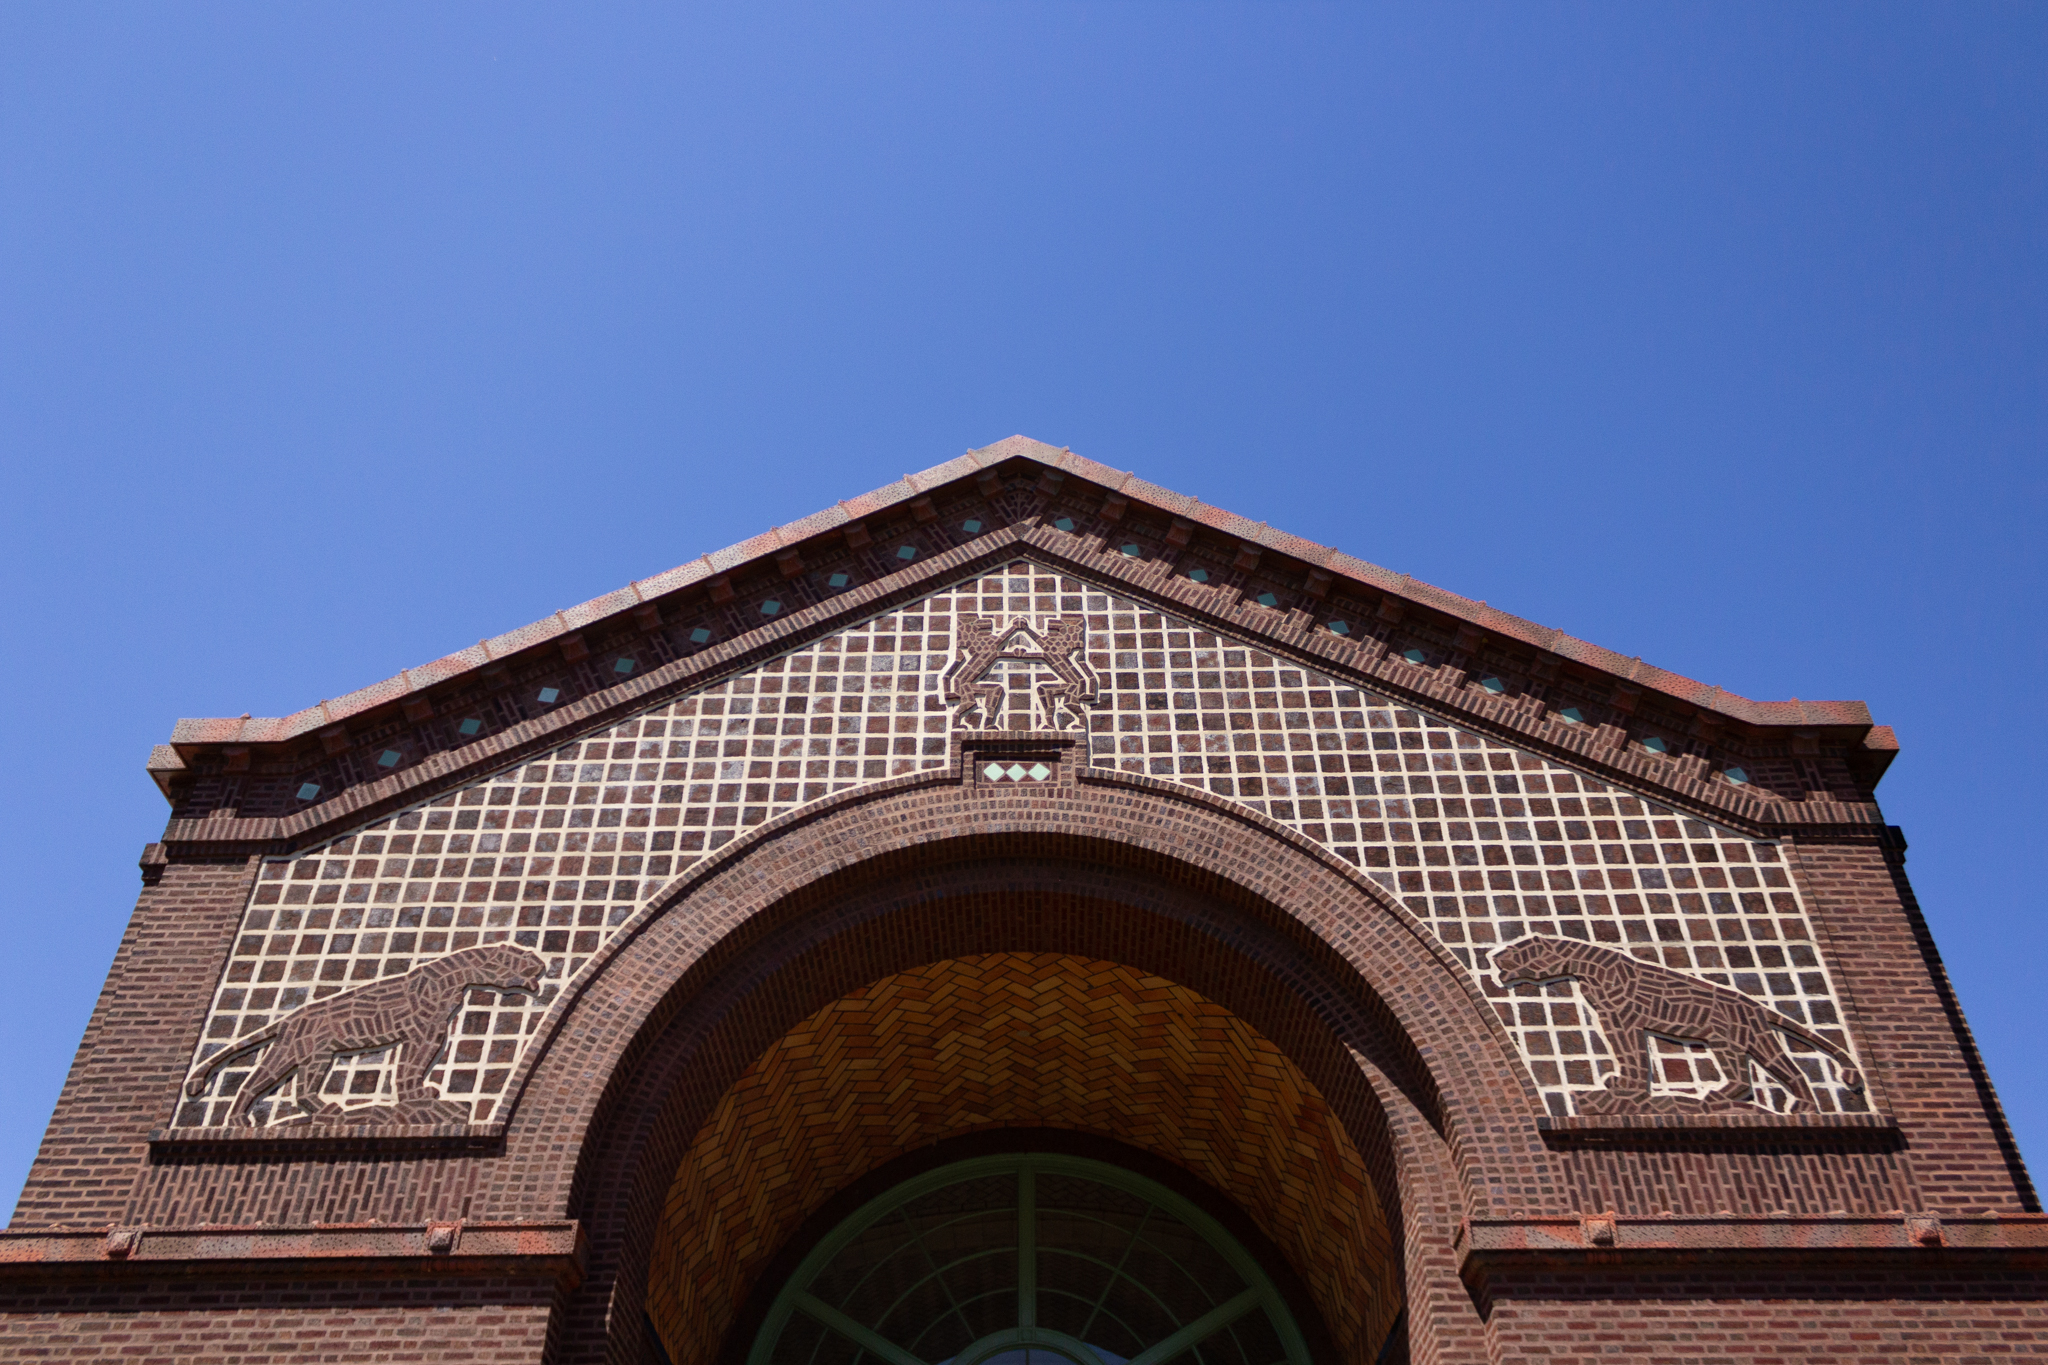 The roof of a building decorated with tiles and lion reliefs against a bright blue sky